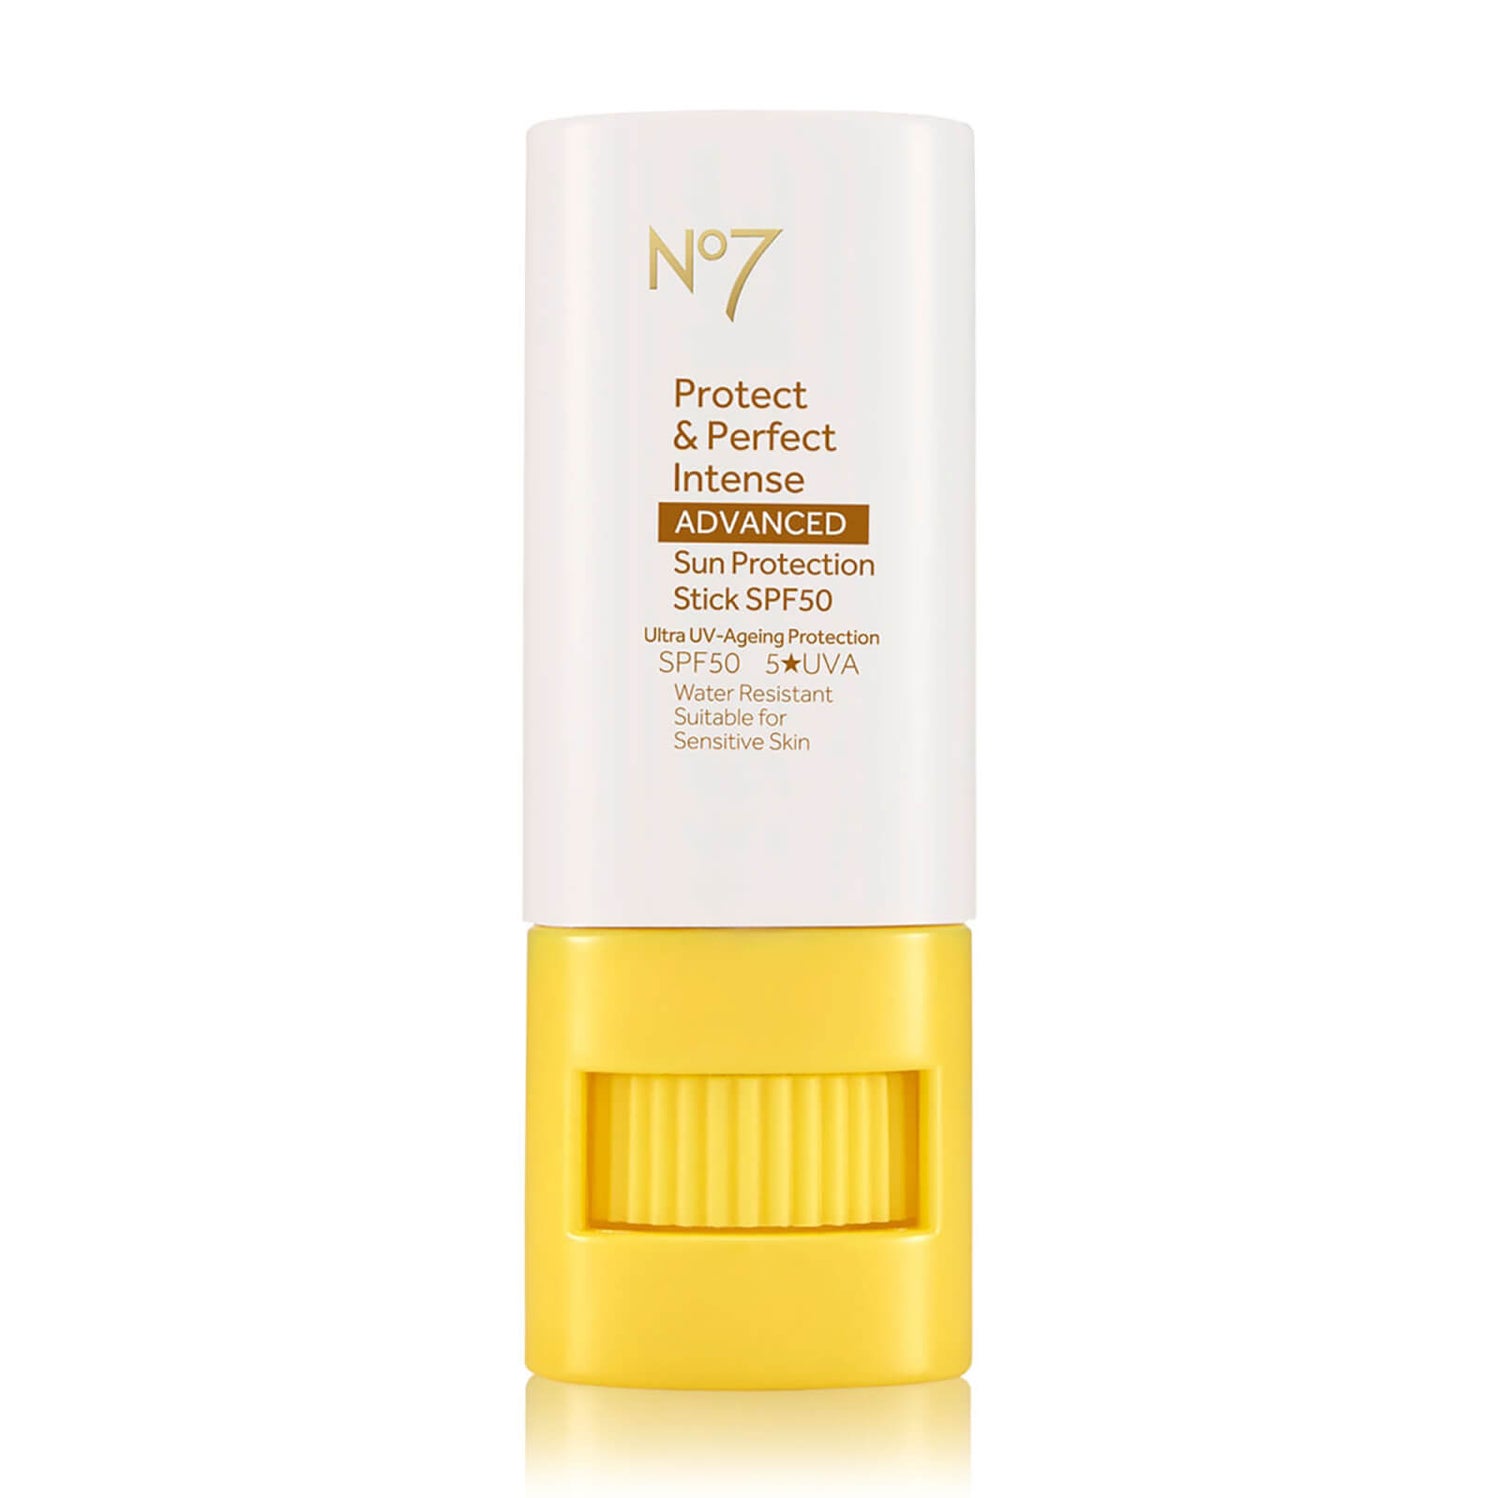 Protect and Perfect Intense ADVANCED Sun Protection Stick SPF 50 7.5g